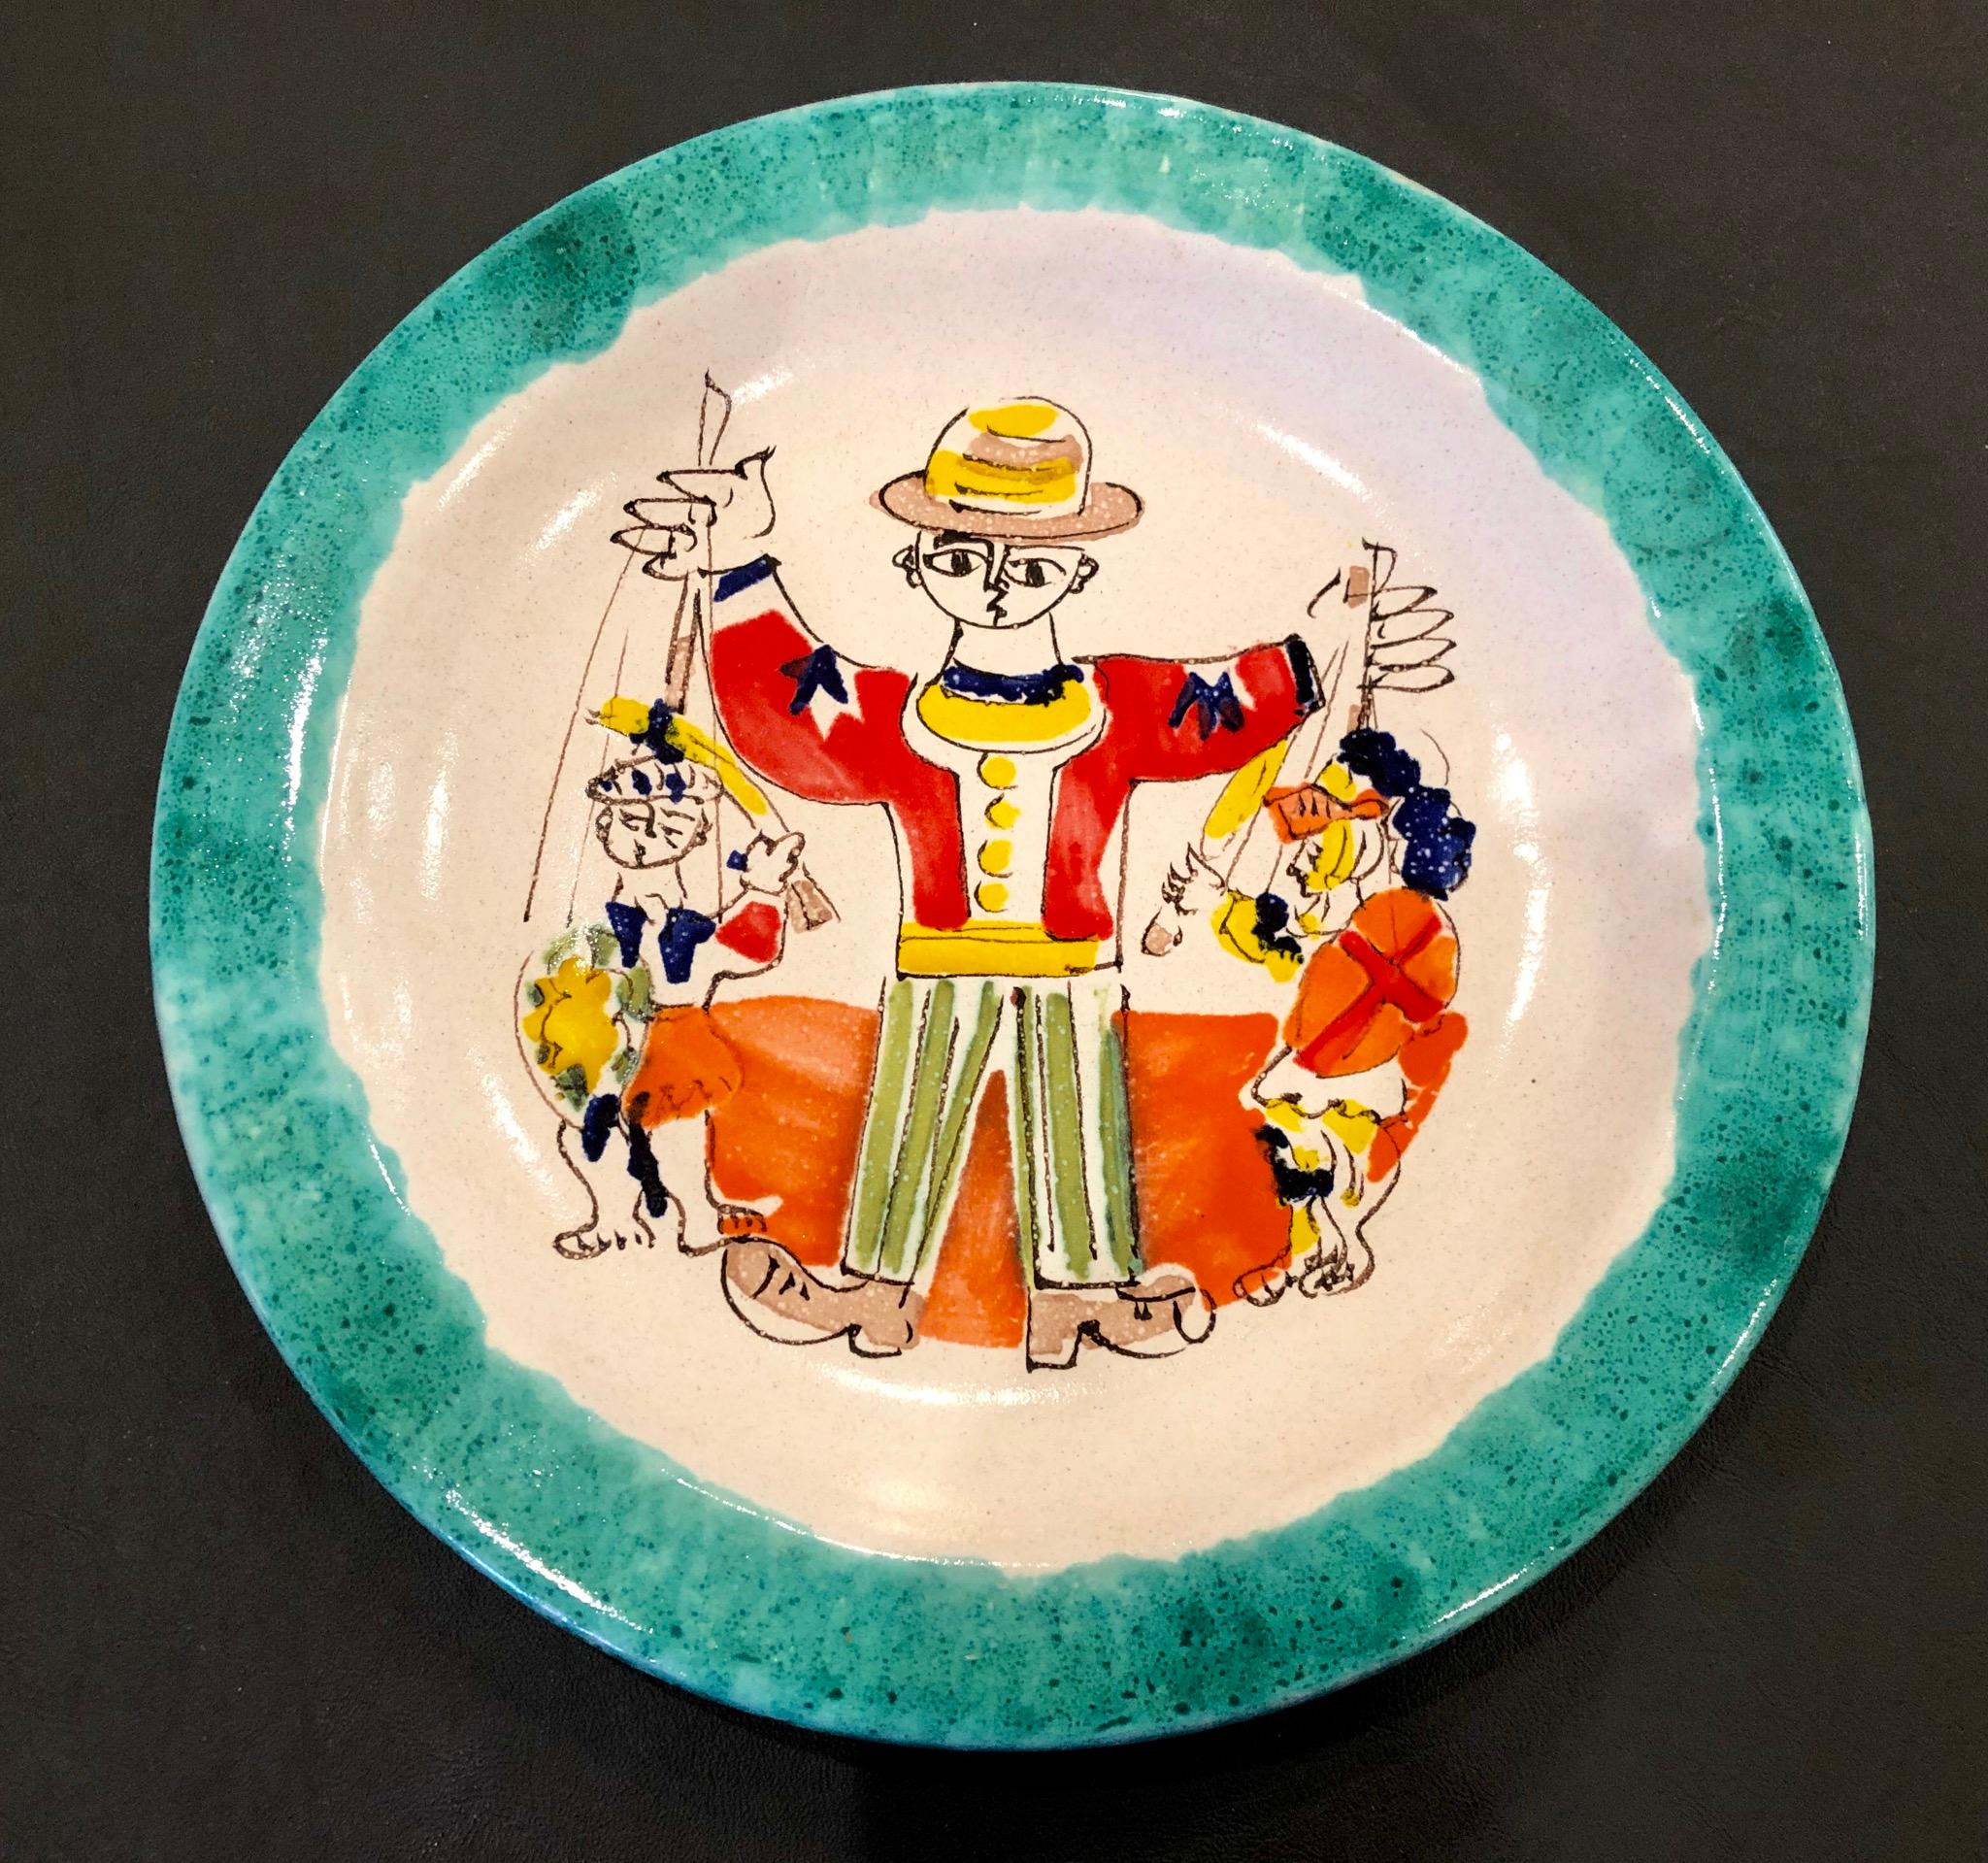 Beautiful design on these ceramic plate, highly collectible plate by DeSimone, circa 1960s, made in Italy, great condition no chips or cracks very light wear. Signed and numbered.